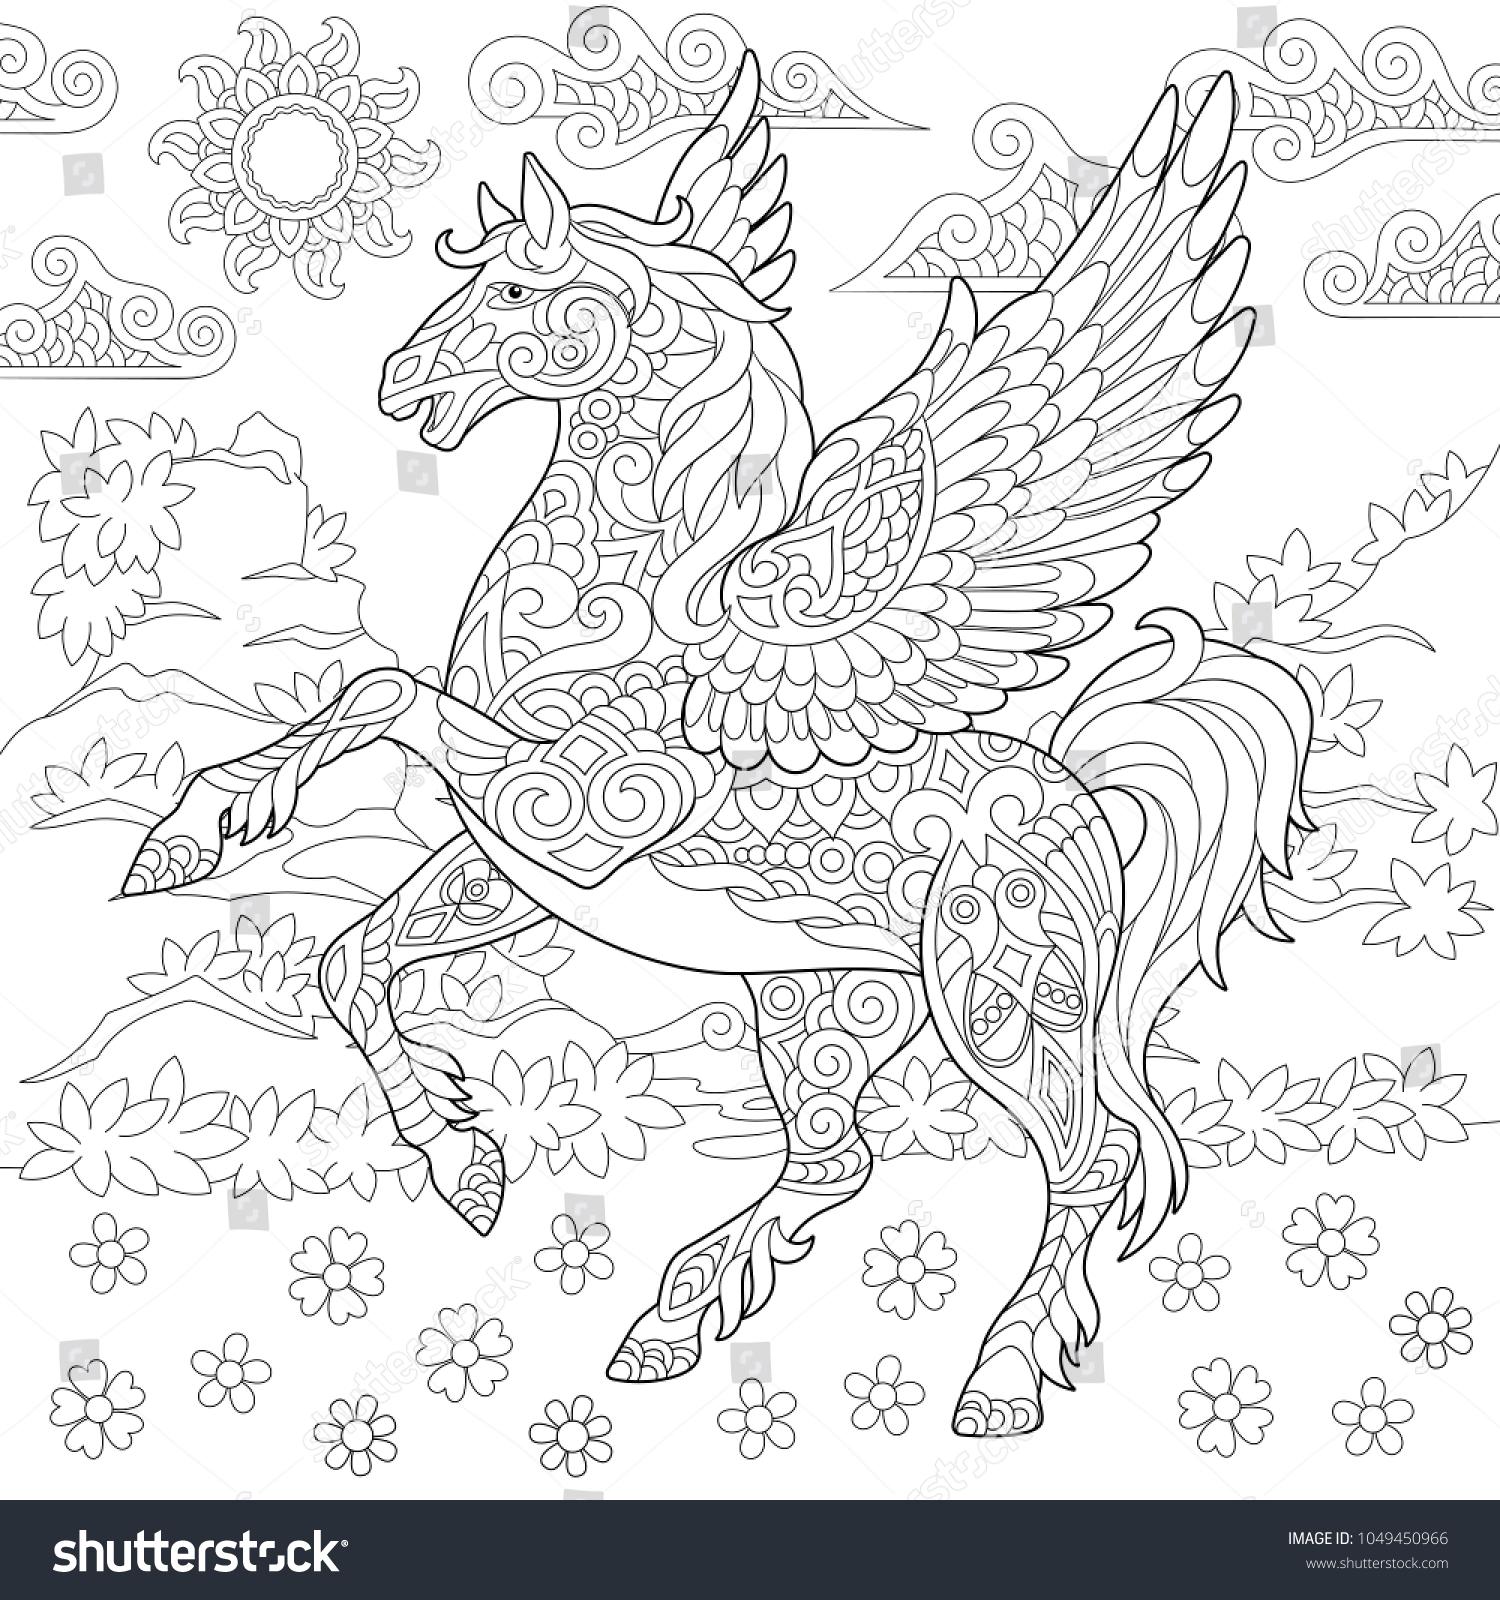 Pegasus Coloring Page Greek Mythological Winged Stock Vector ...